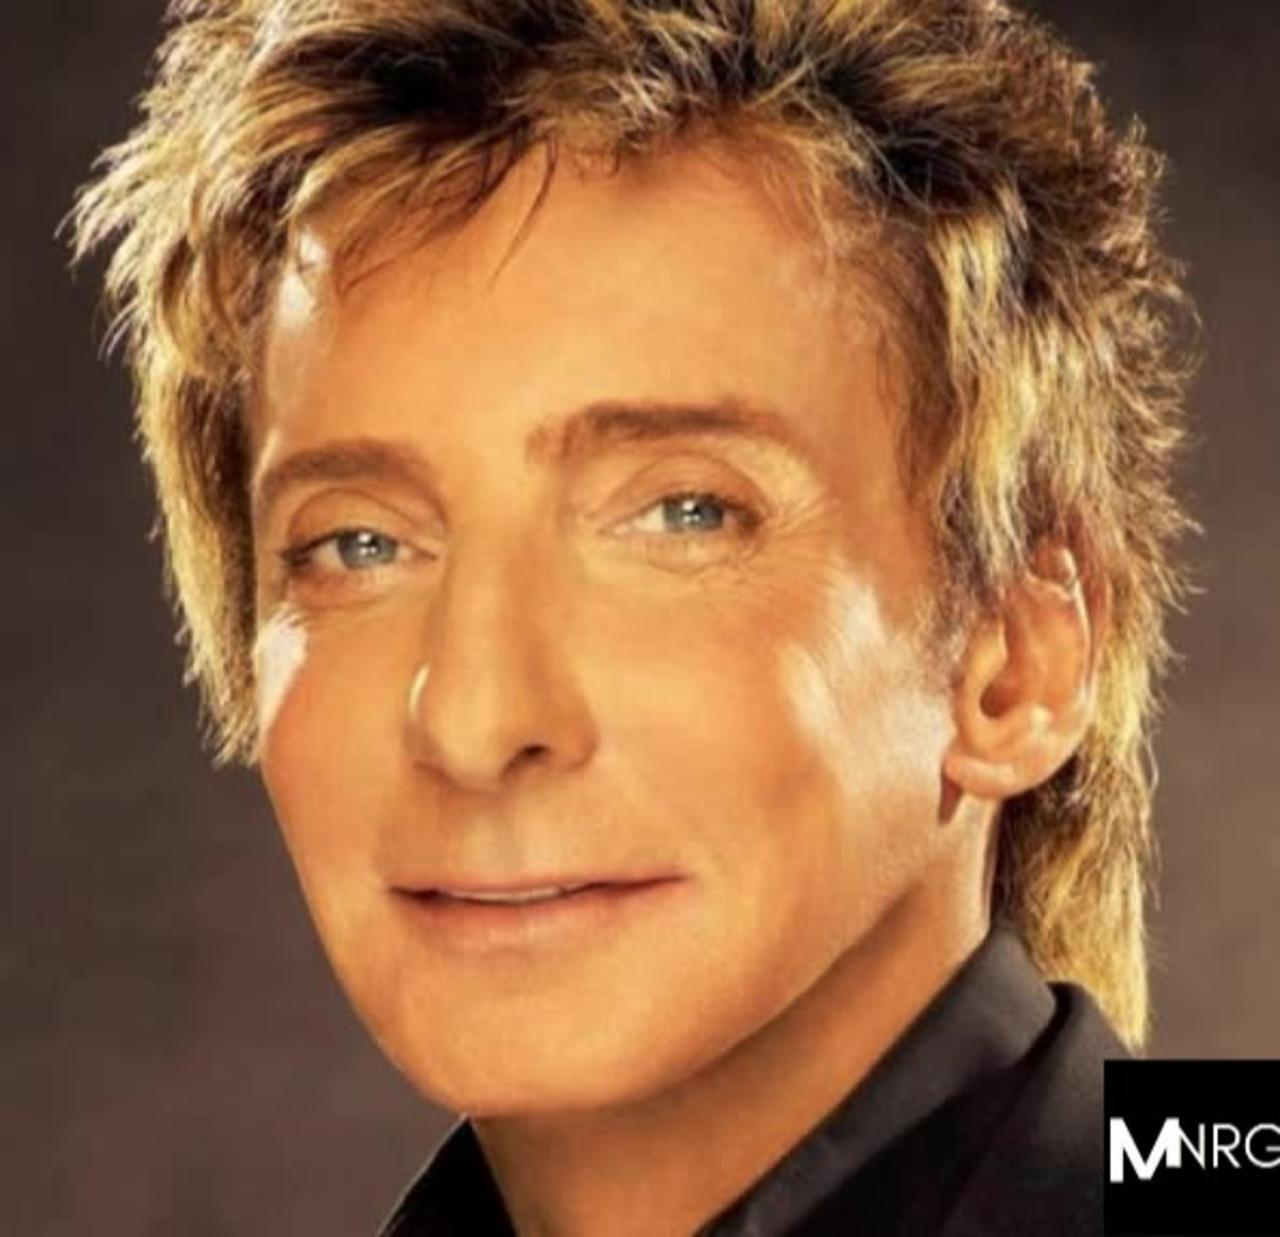 Barry Manilow - I AM Your Child 432